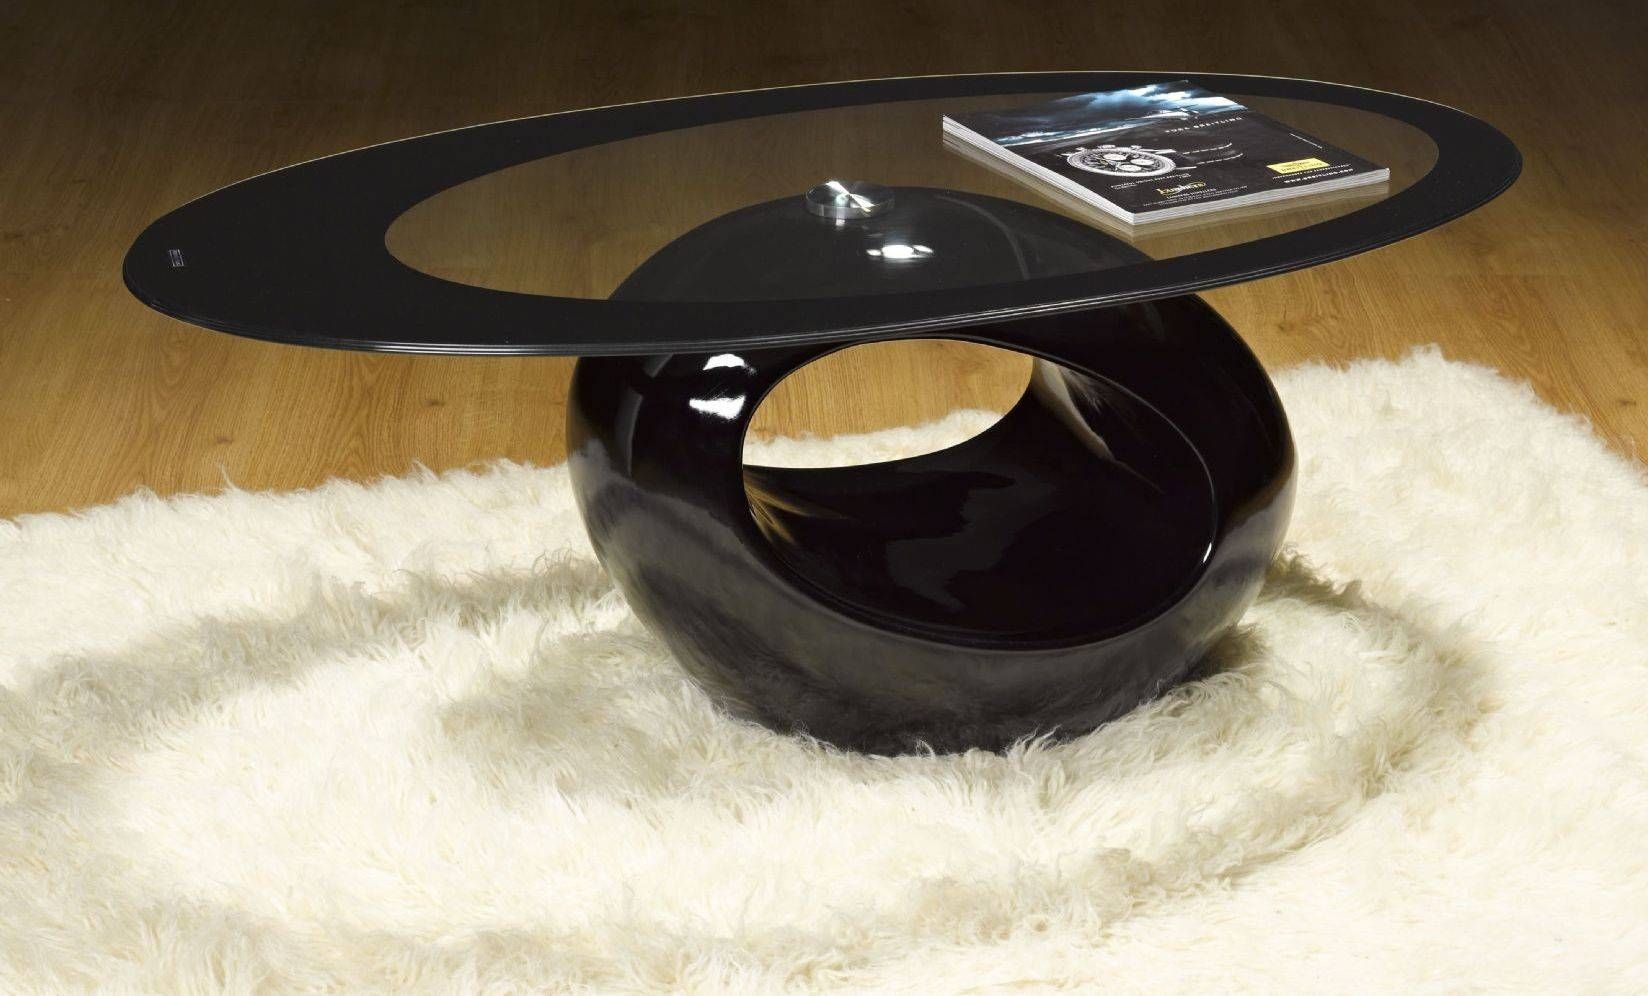 Decor Your Living Room In Style With Oval Coffee Table | Home With Regard To Black Oval Coffee Tables (View 7 of 30)